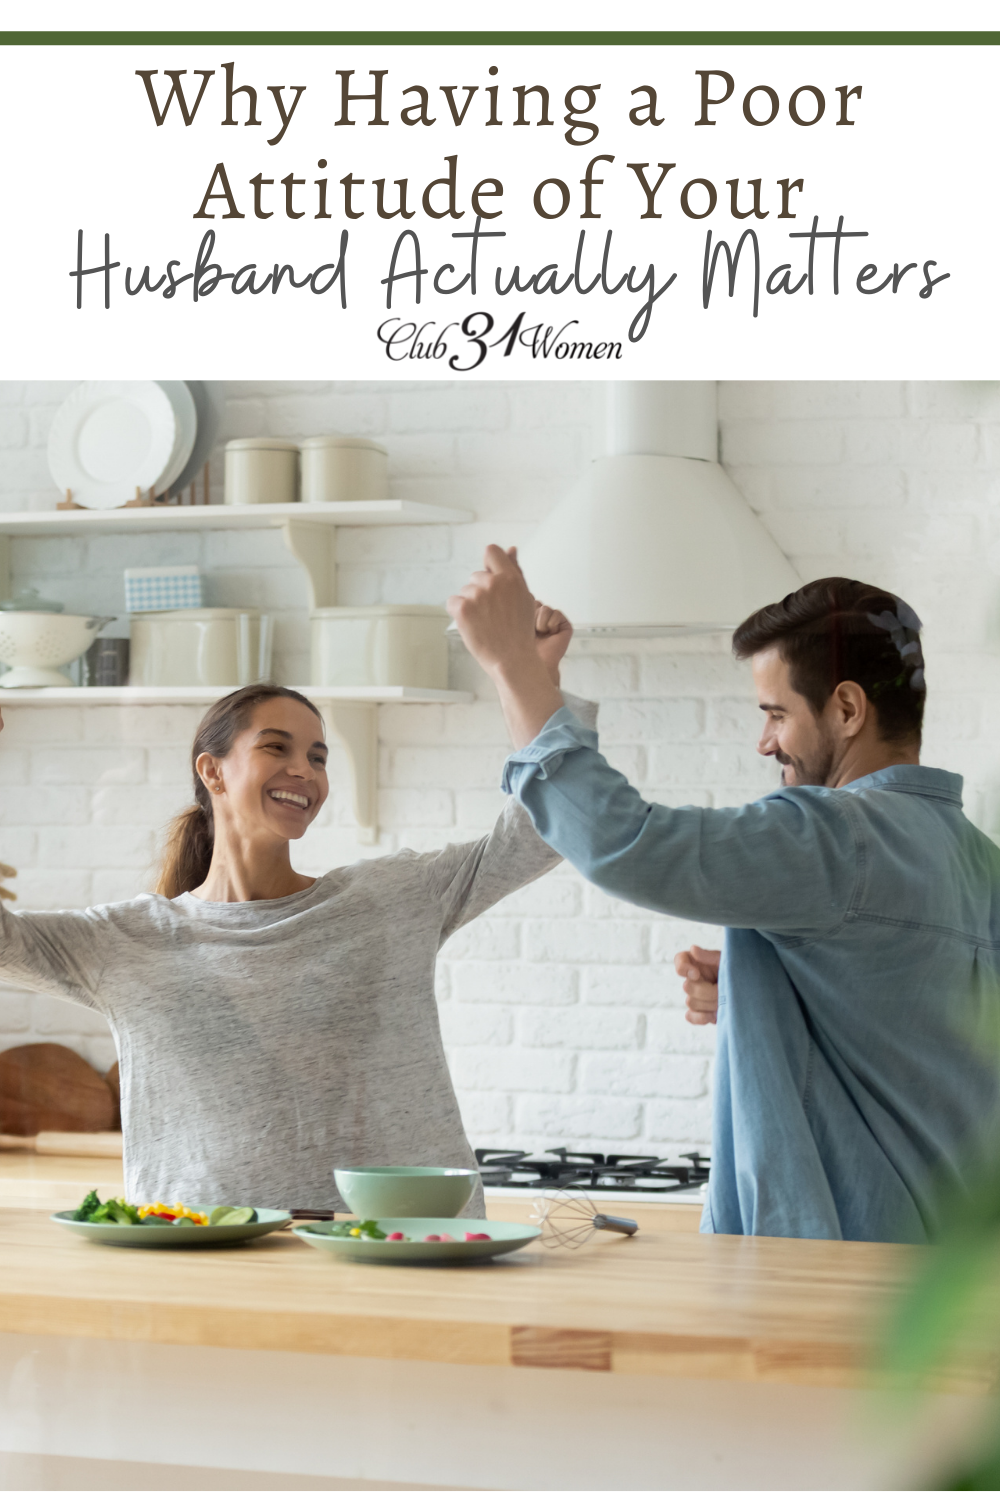 Having a poor attitude toward your husband actually matters in your marriage. It can be harmful to him and your relationship. via @Club31Women